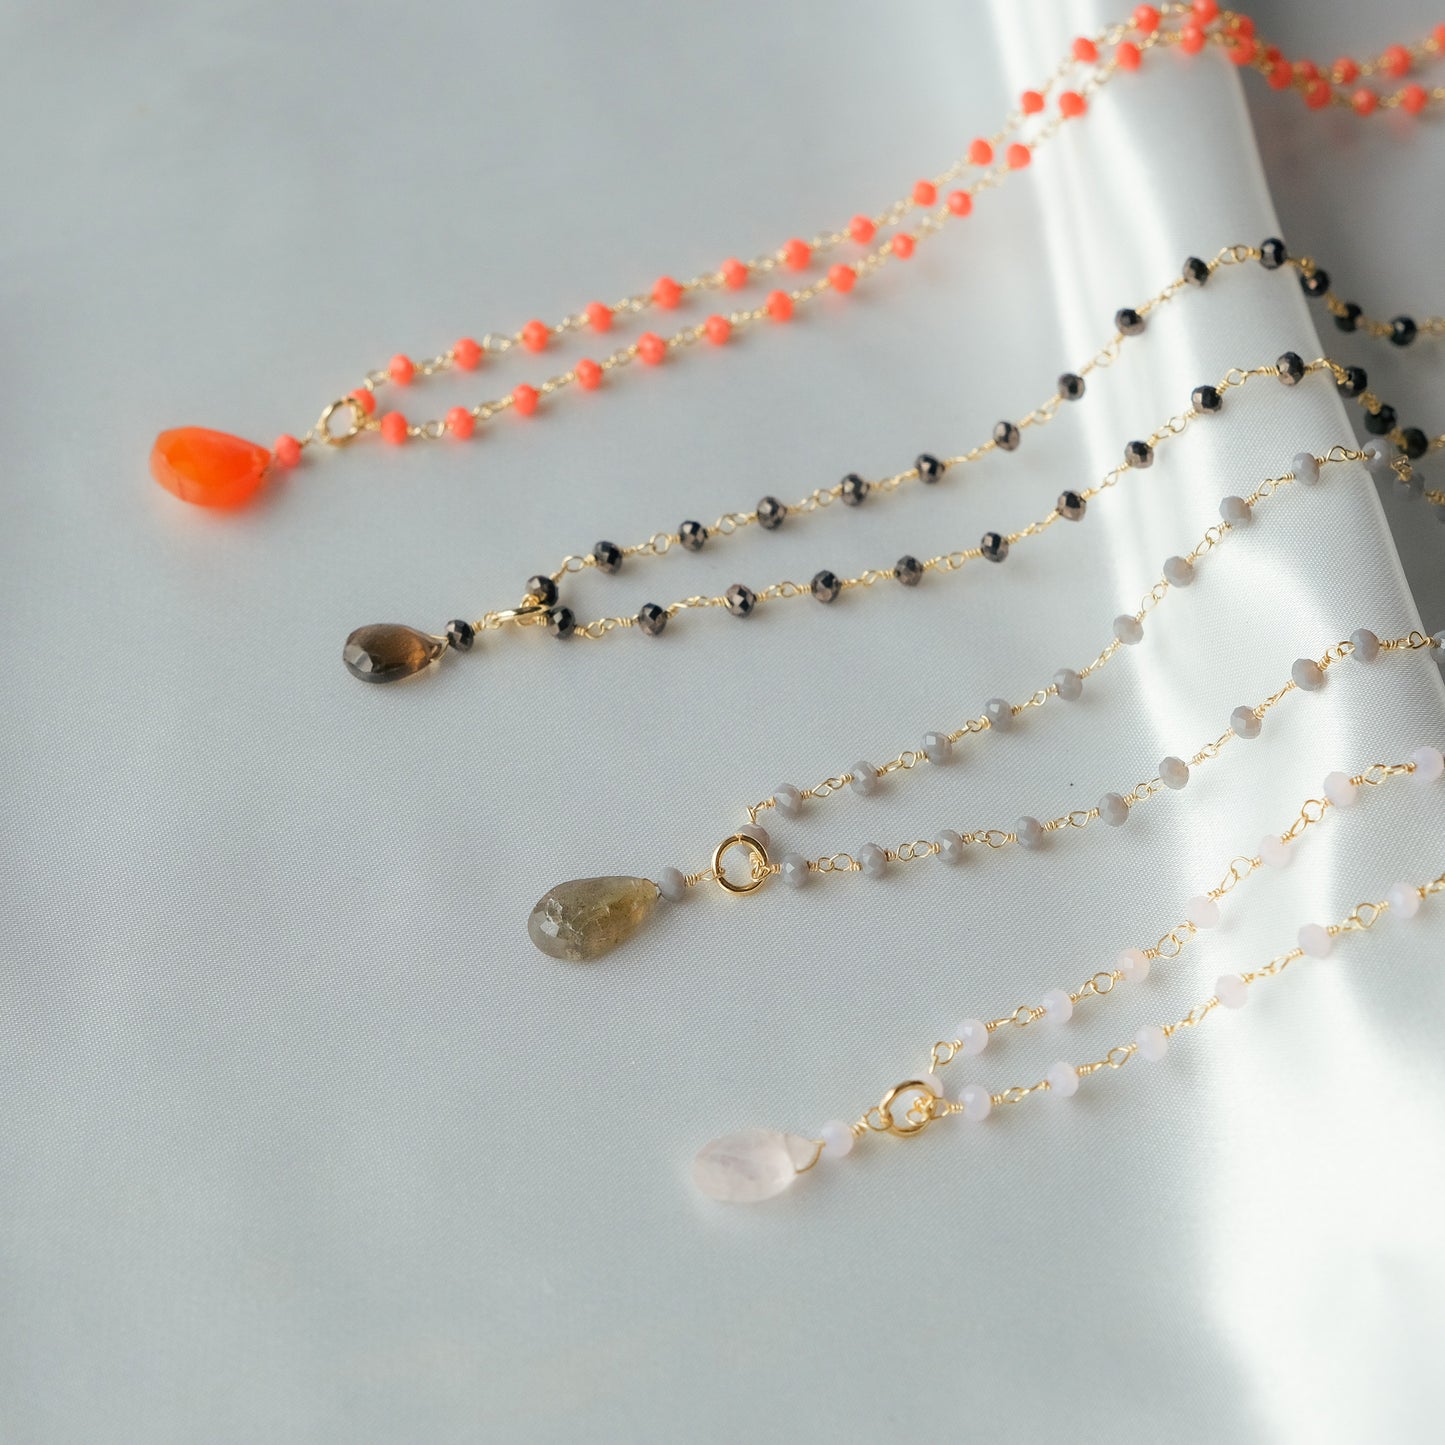 Natural stone and beads 2WAY long necklace